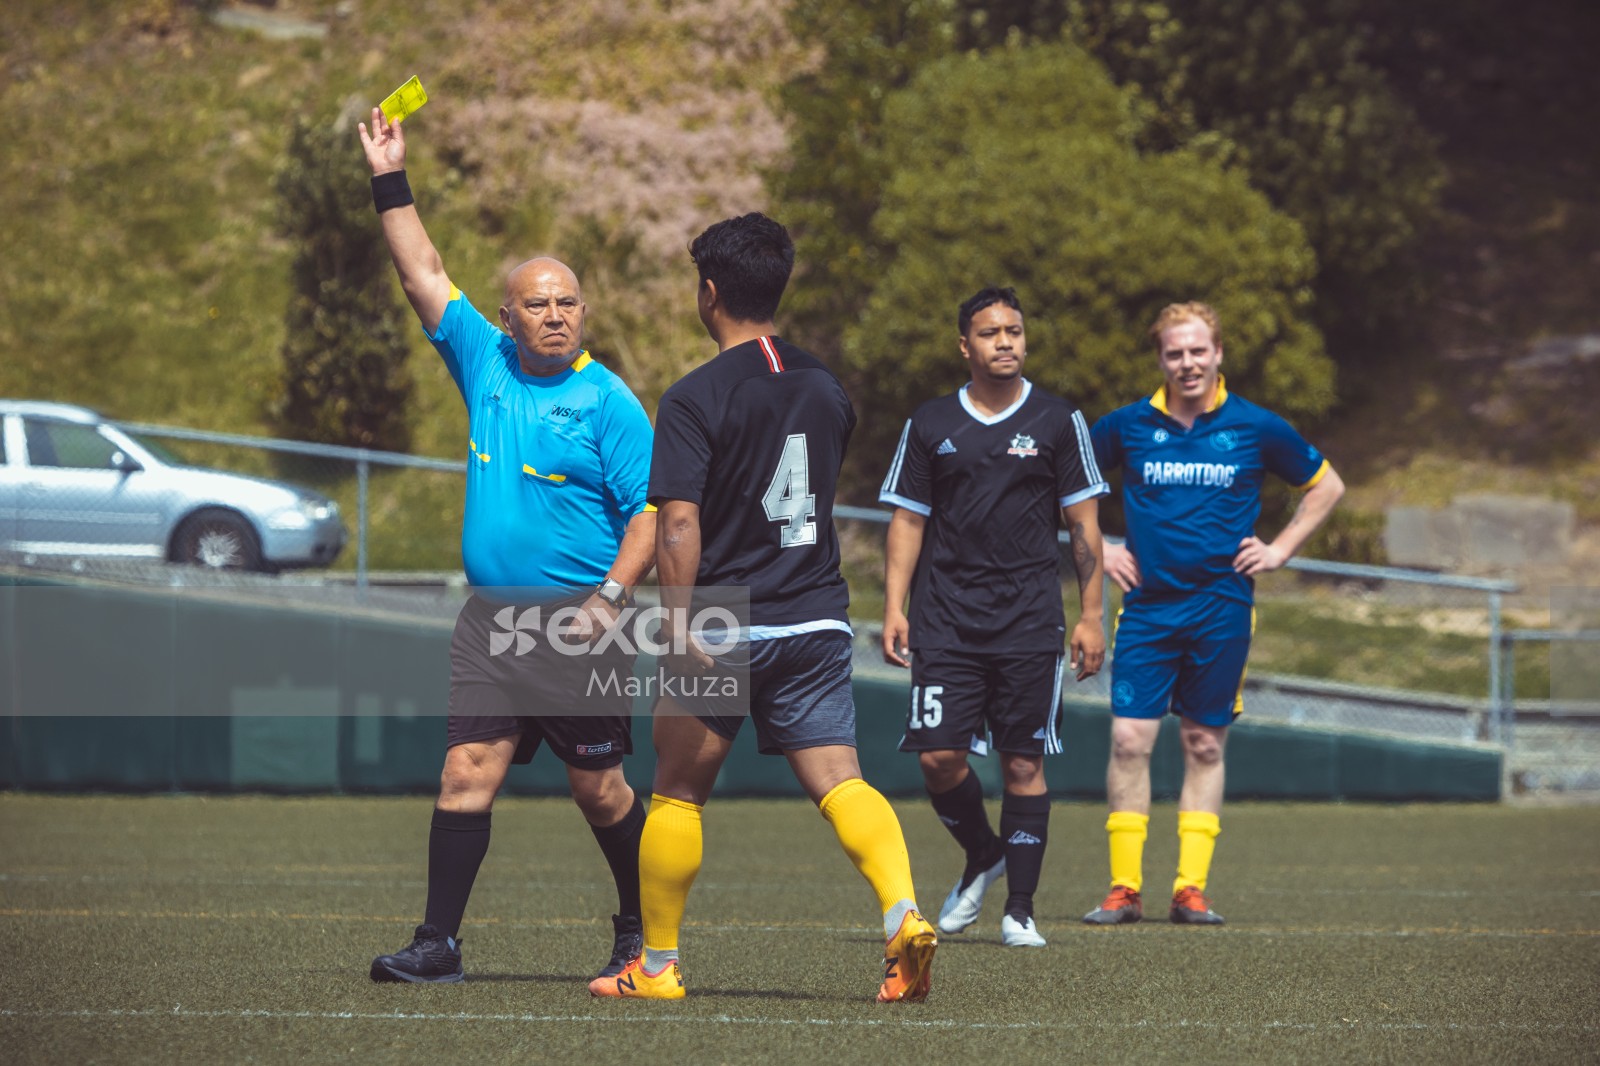 Referee gives yellow card to player over illegal tackle - Sports Zone sunday league